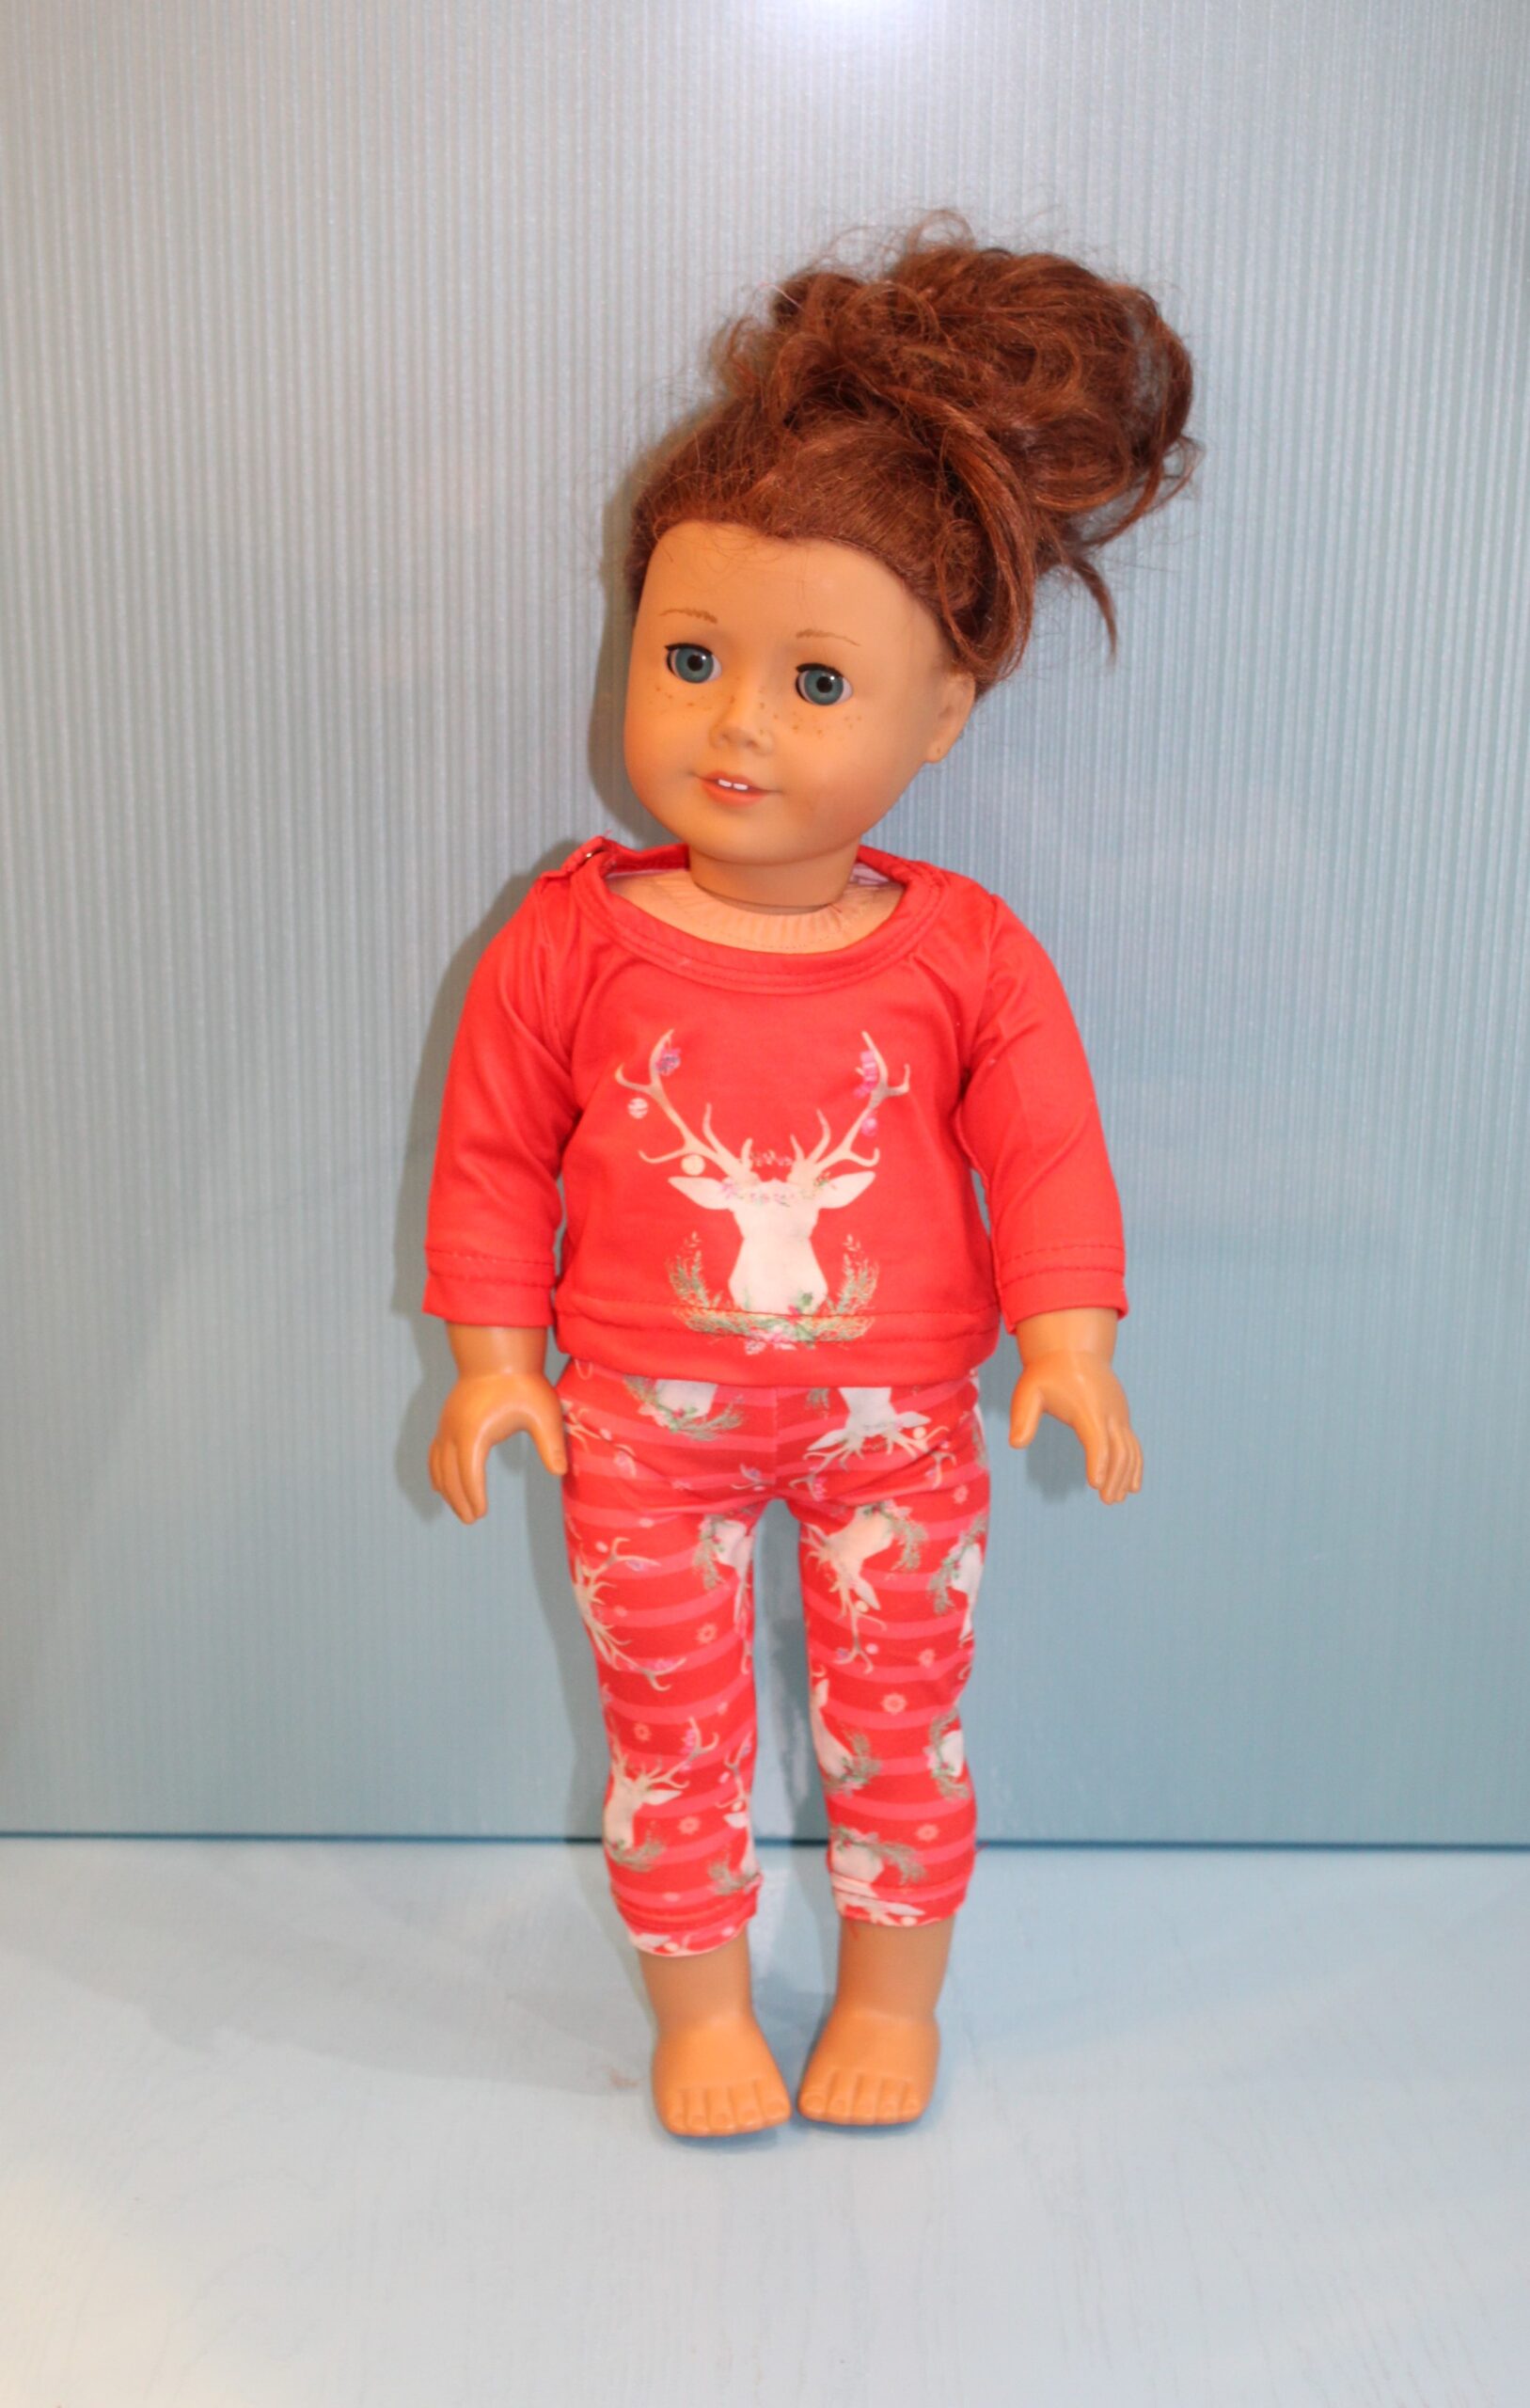 Every Girl of the Year Doll's Pajamas!